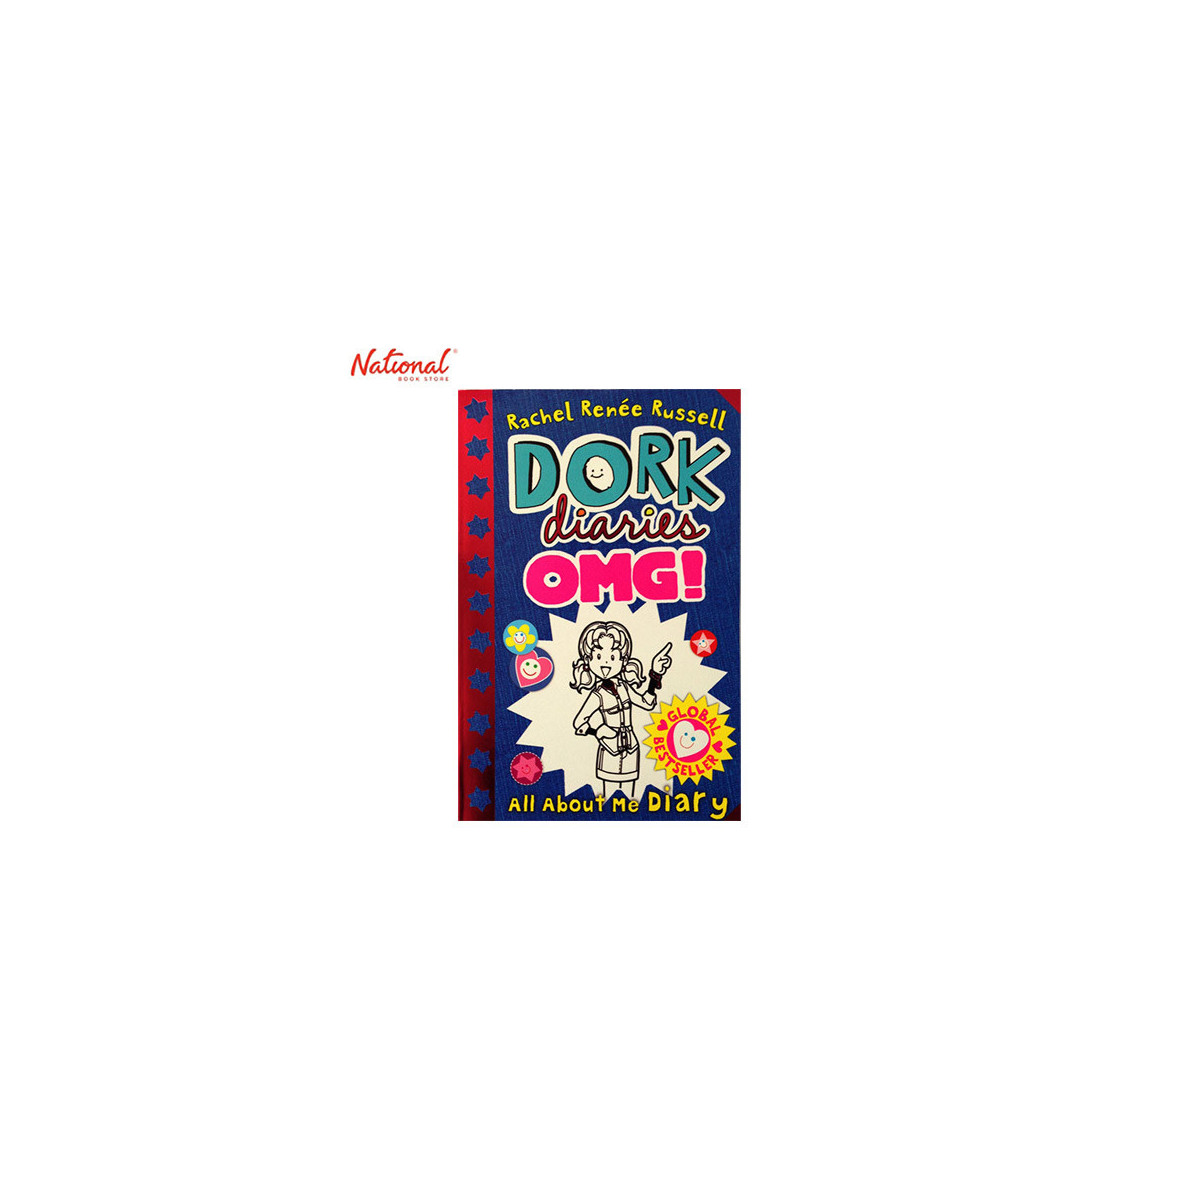 DORK DIARIES UK OMG ALL ABOUT ME DIARY